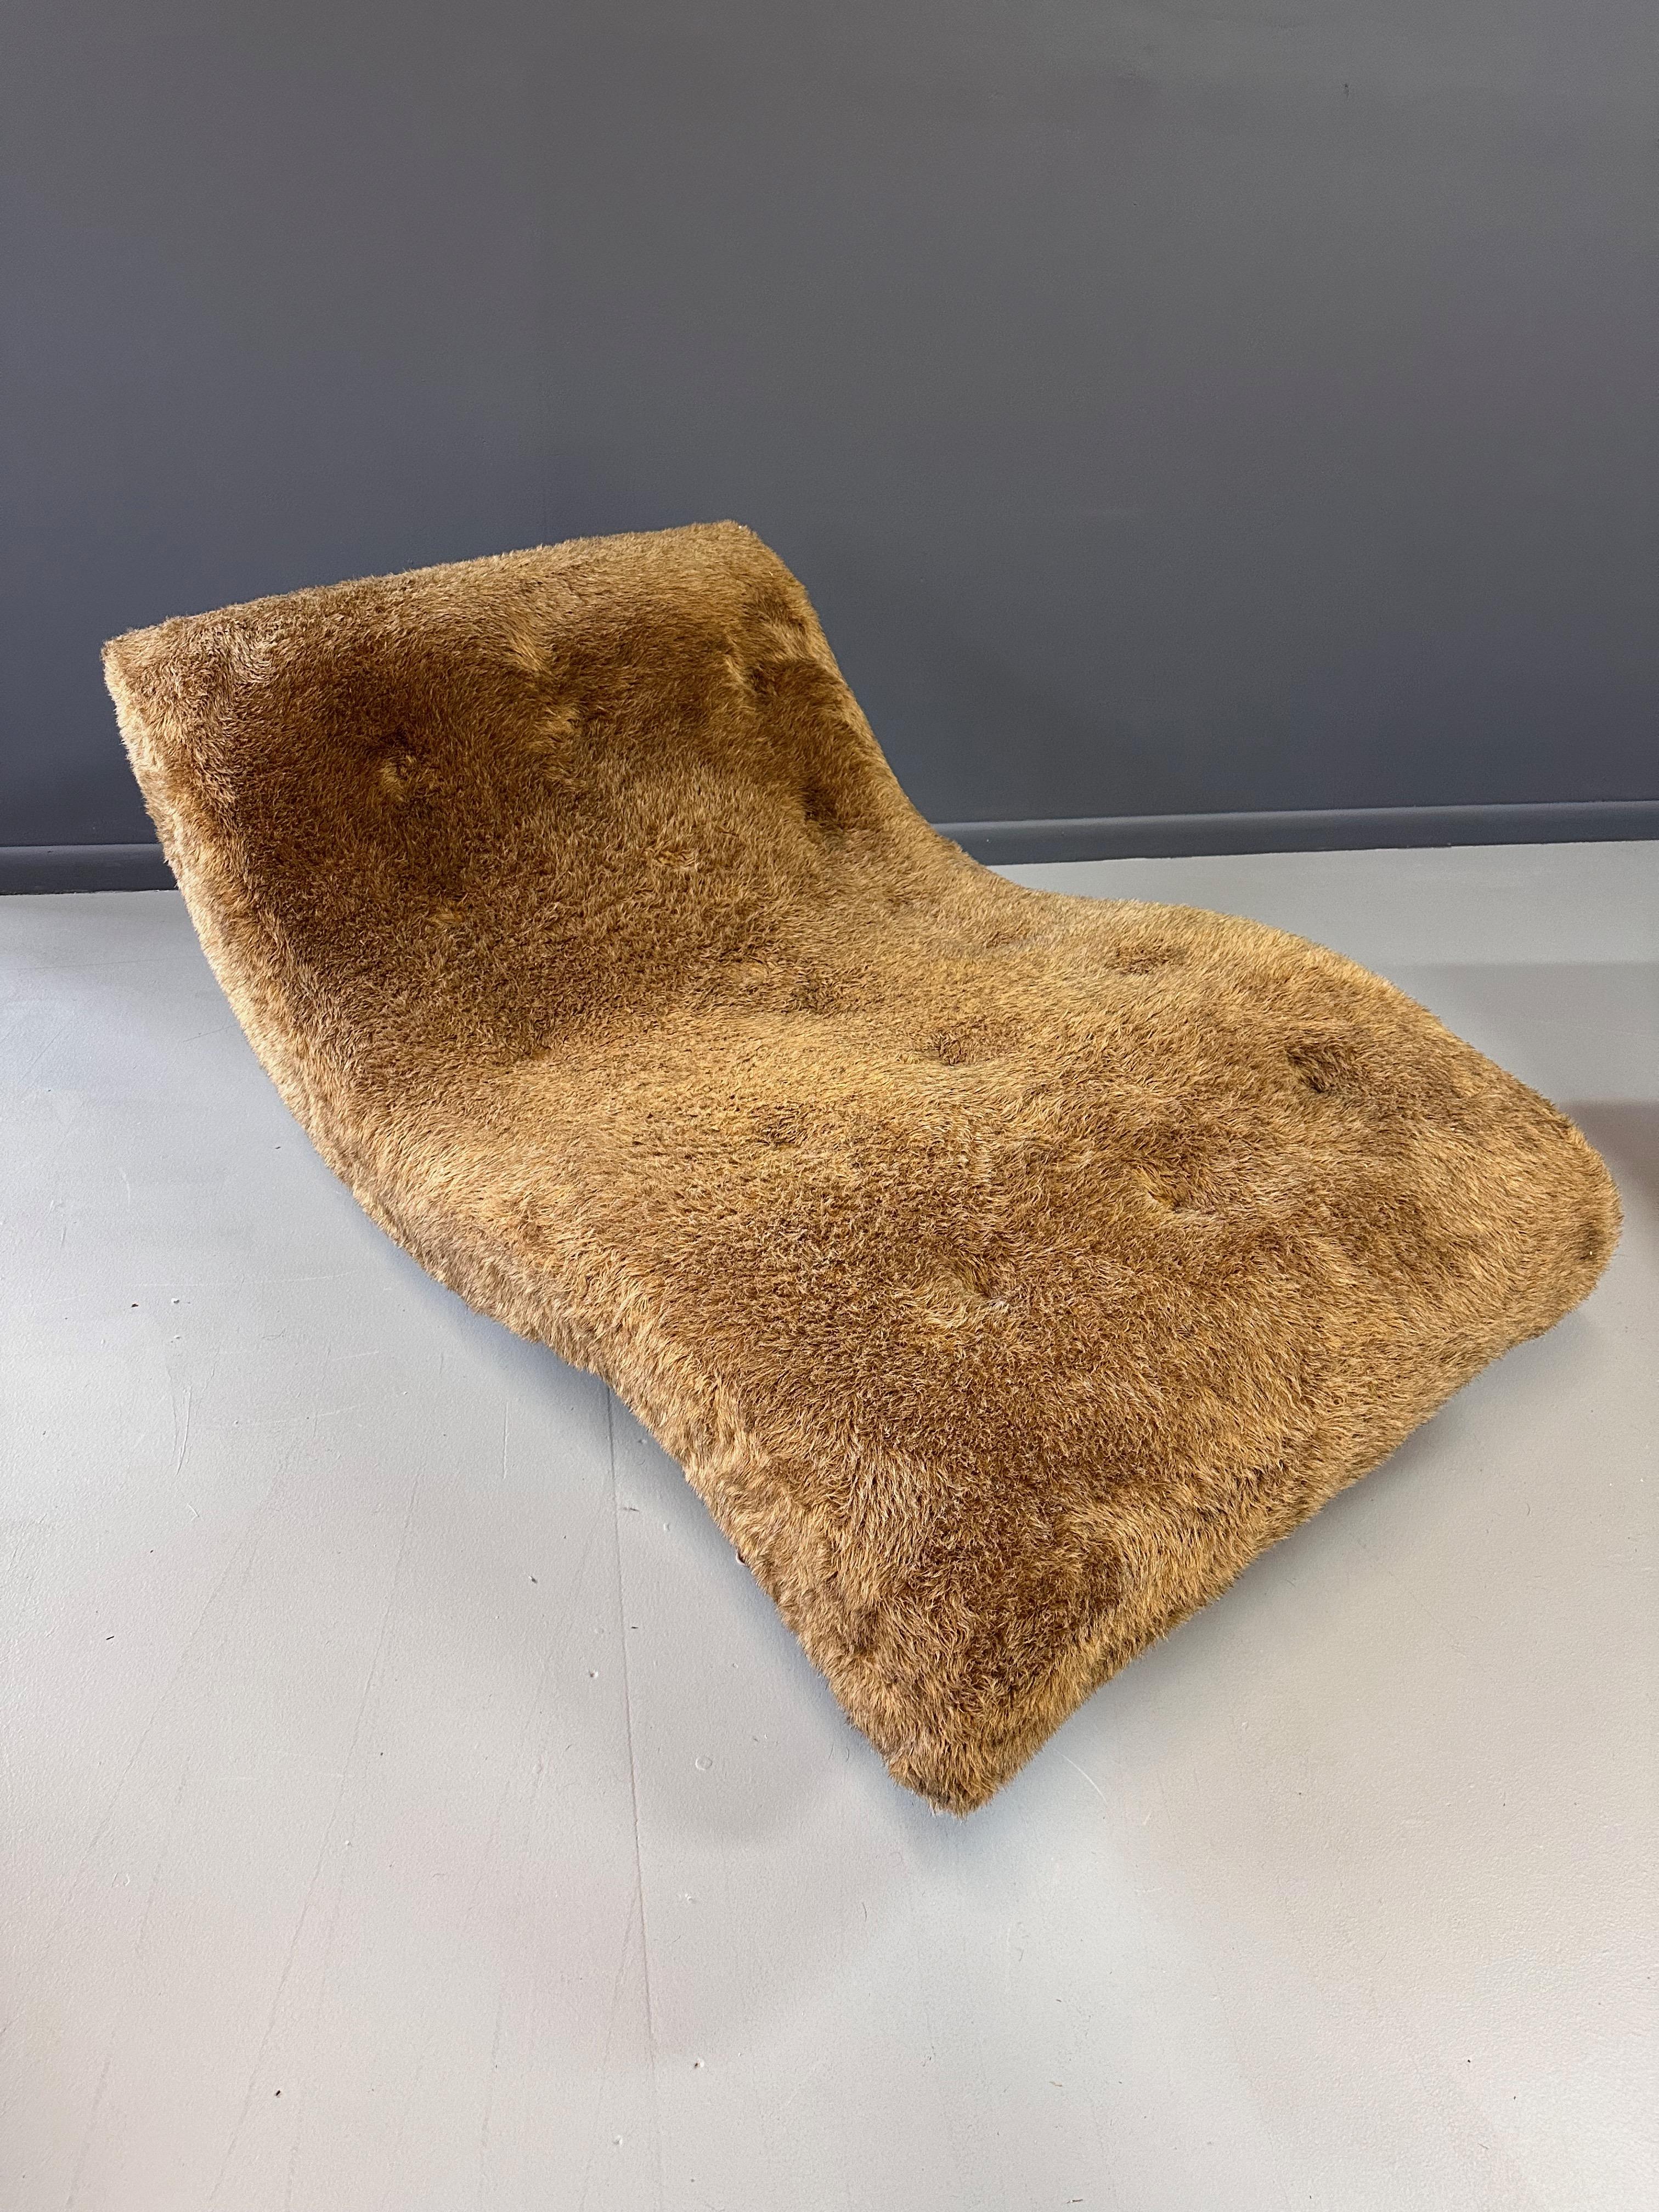 Mid-Century Modern Adrian Pearsall Style 1970s Wave Lounge Chair in a Fun Faux Fur Mid Century For Sale